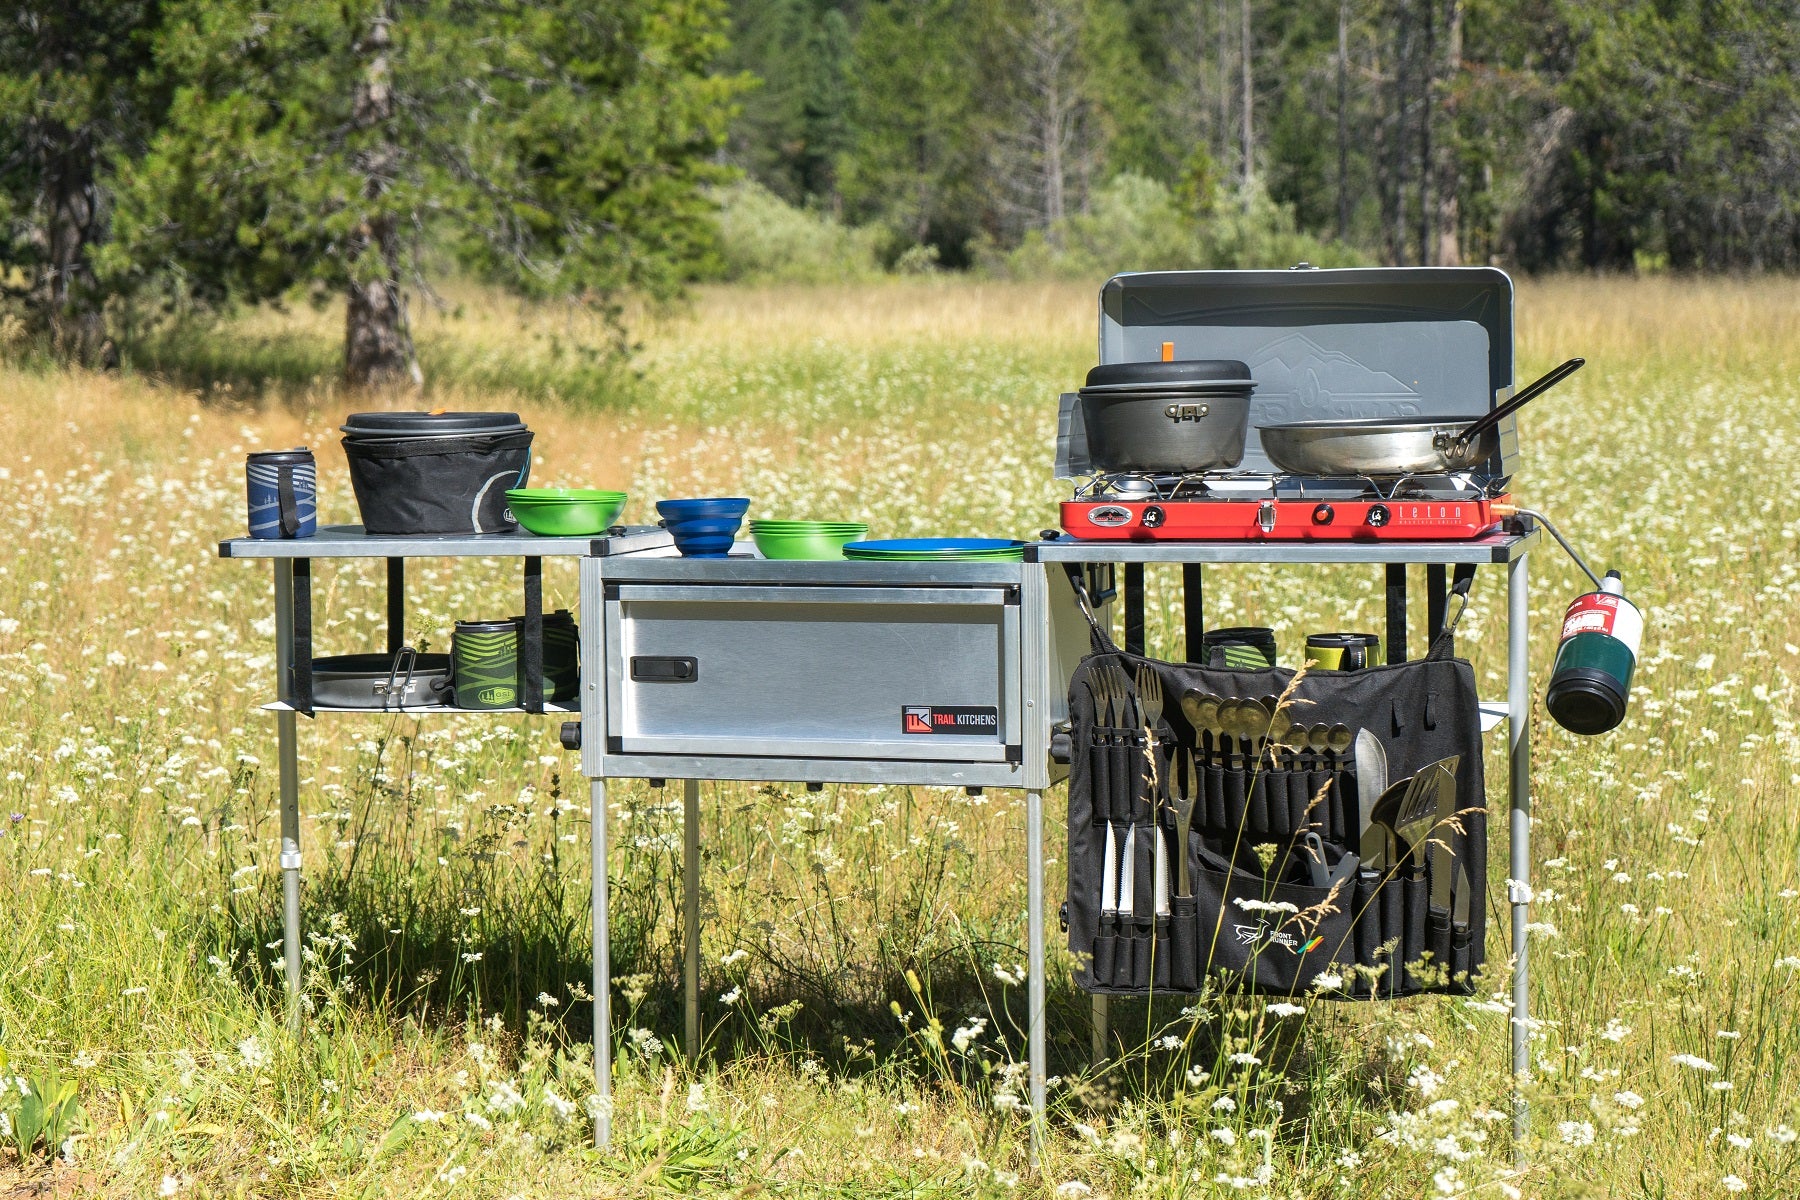 Portable Camping Kitchens - Outdoor Cooking Table with Sink